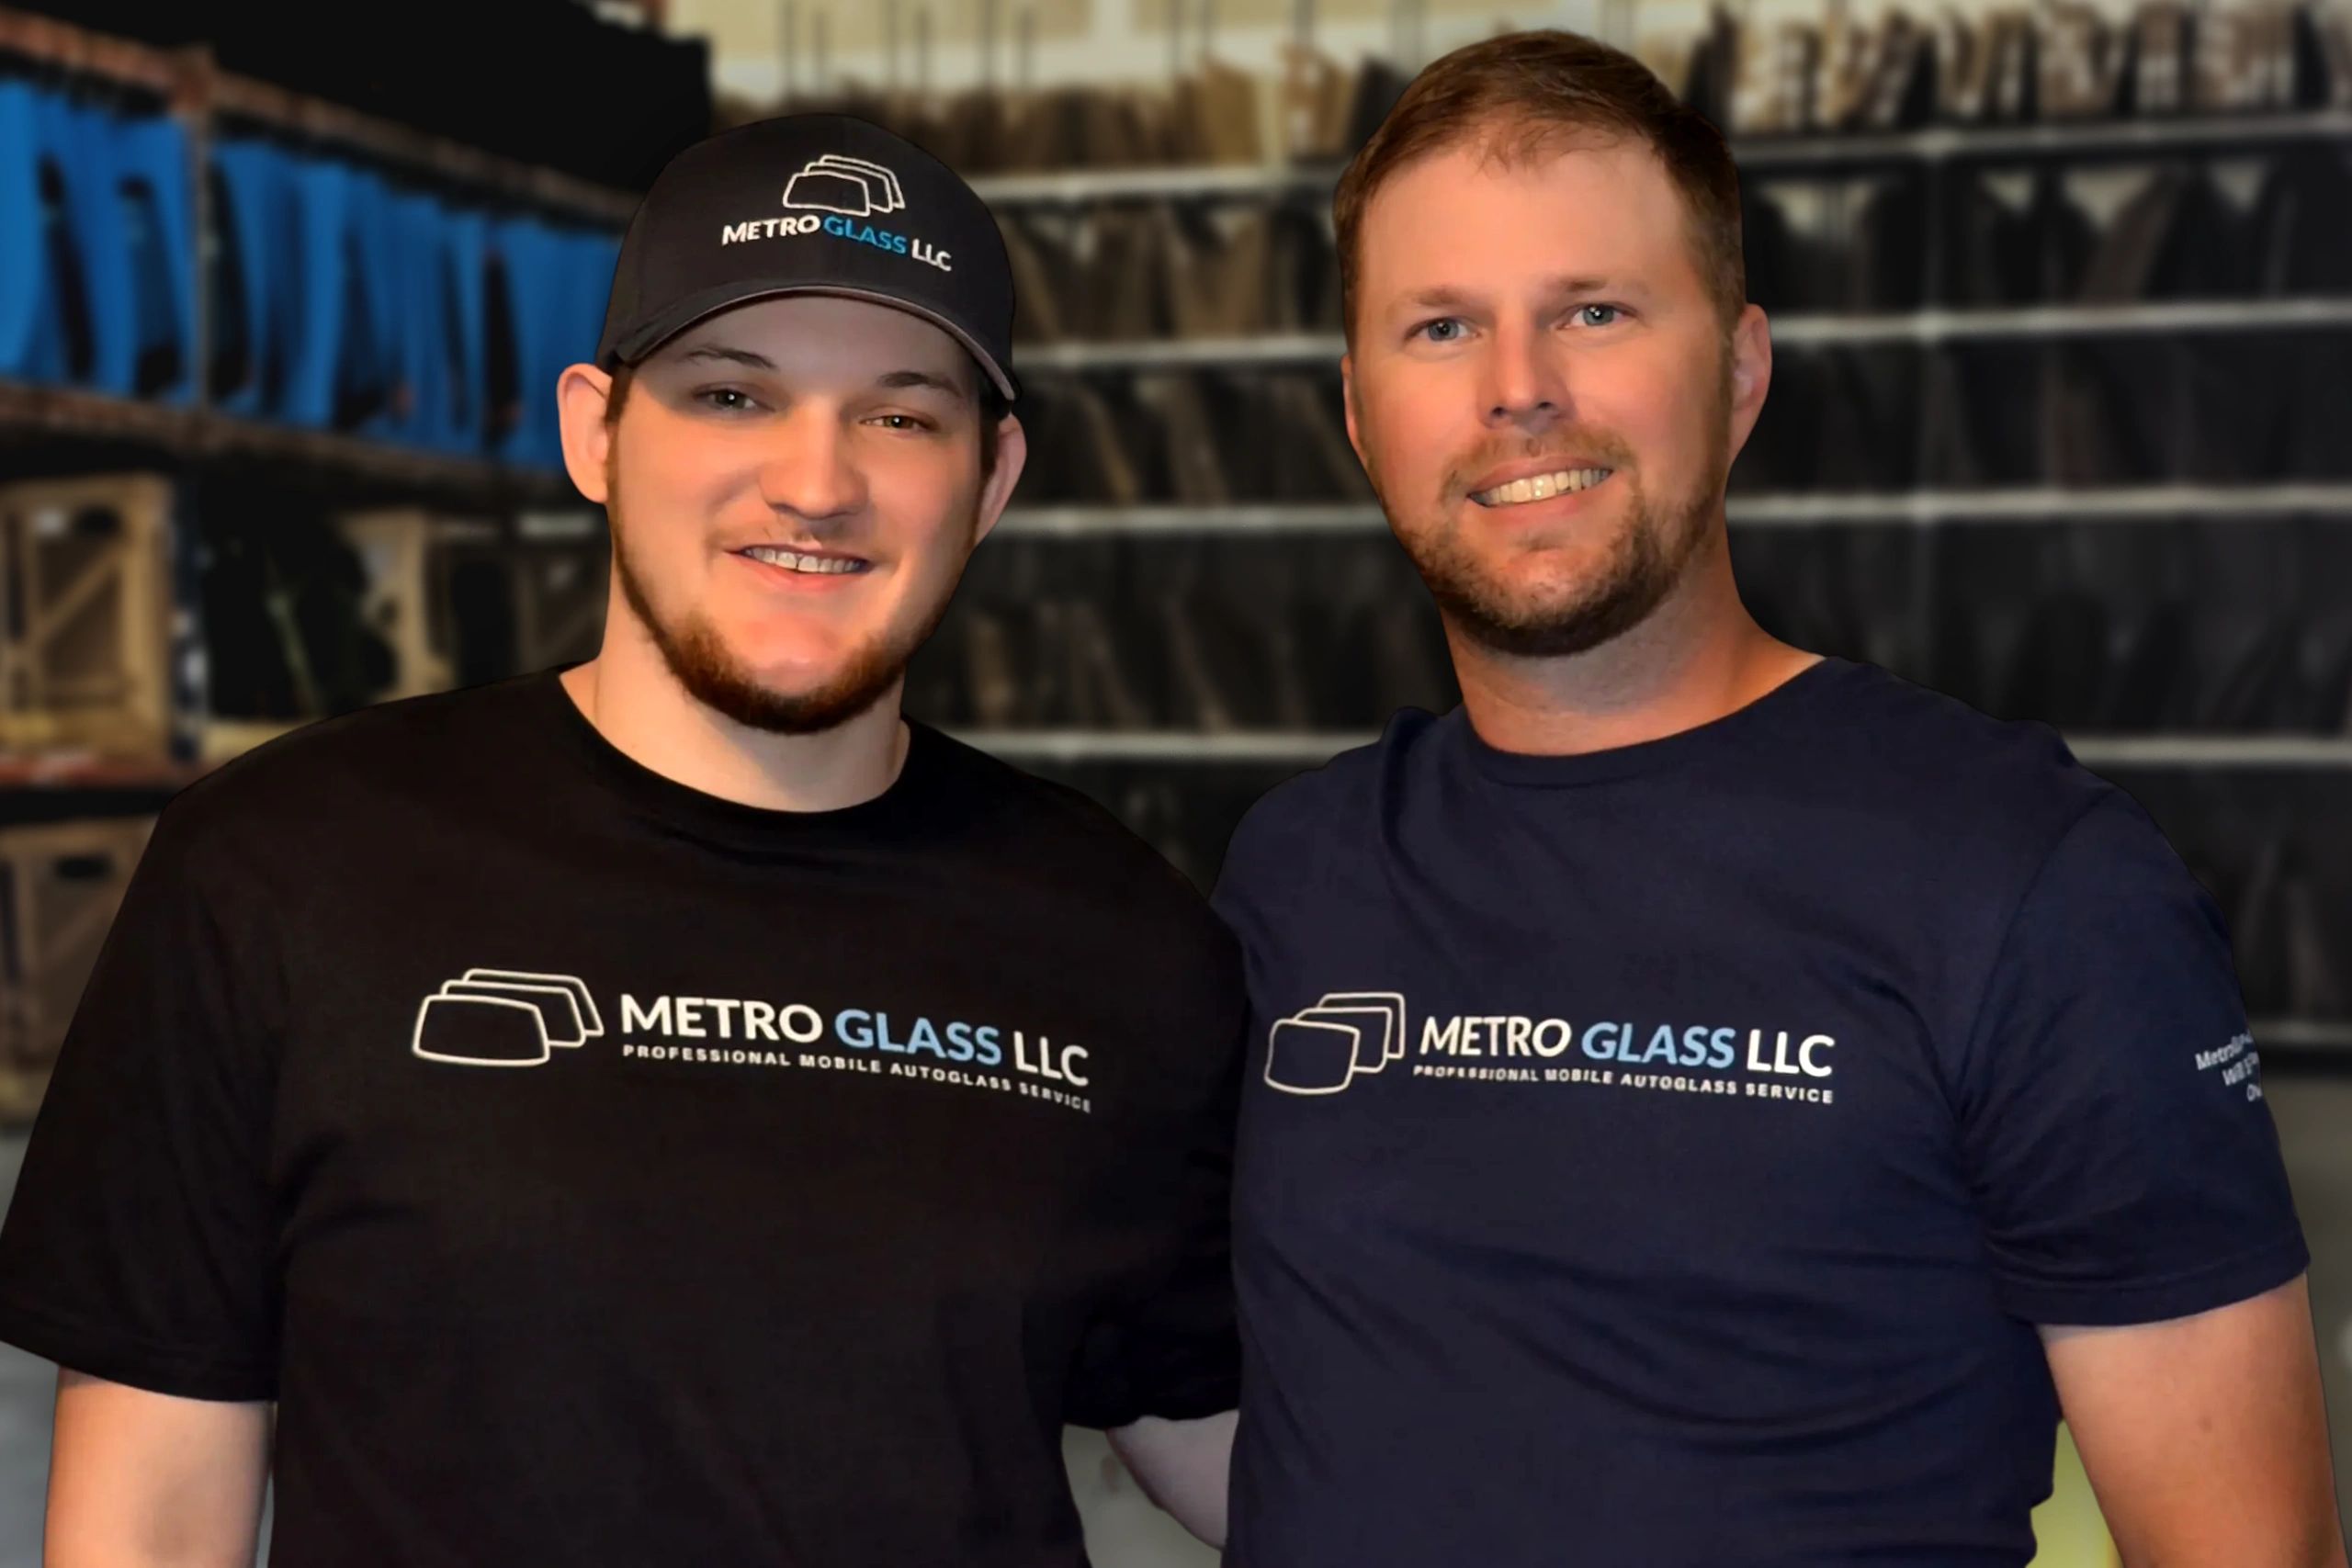 Owner Will B. and Cecil T. of Metro Glass LLC of Ridgeland, MS Auto Glass Shop